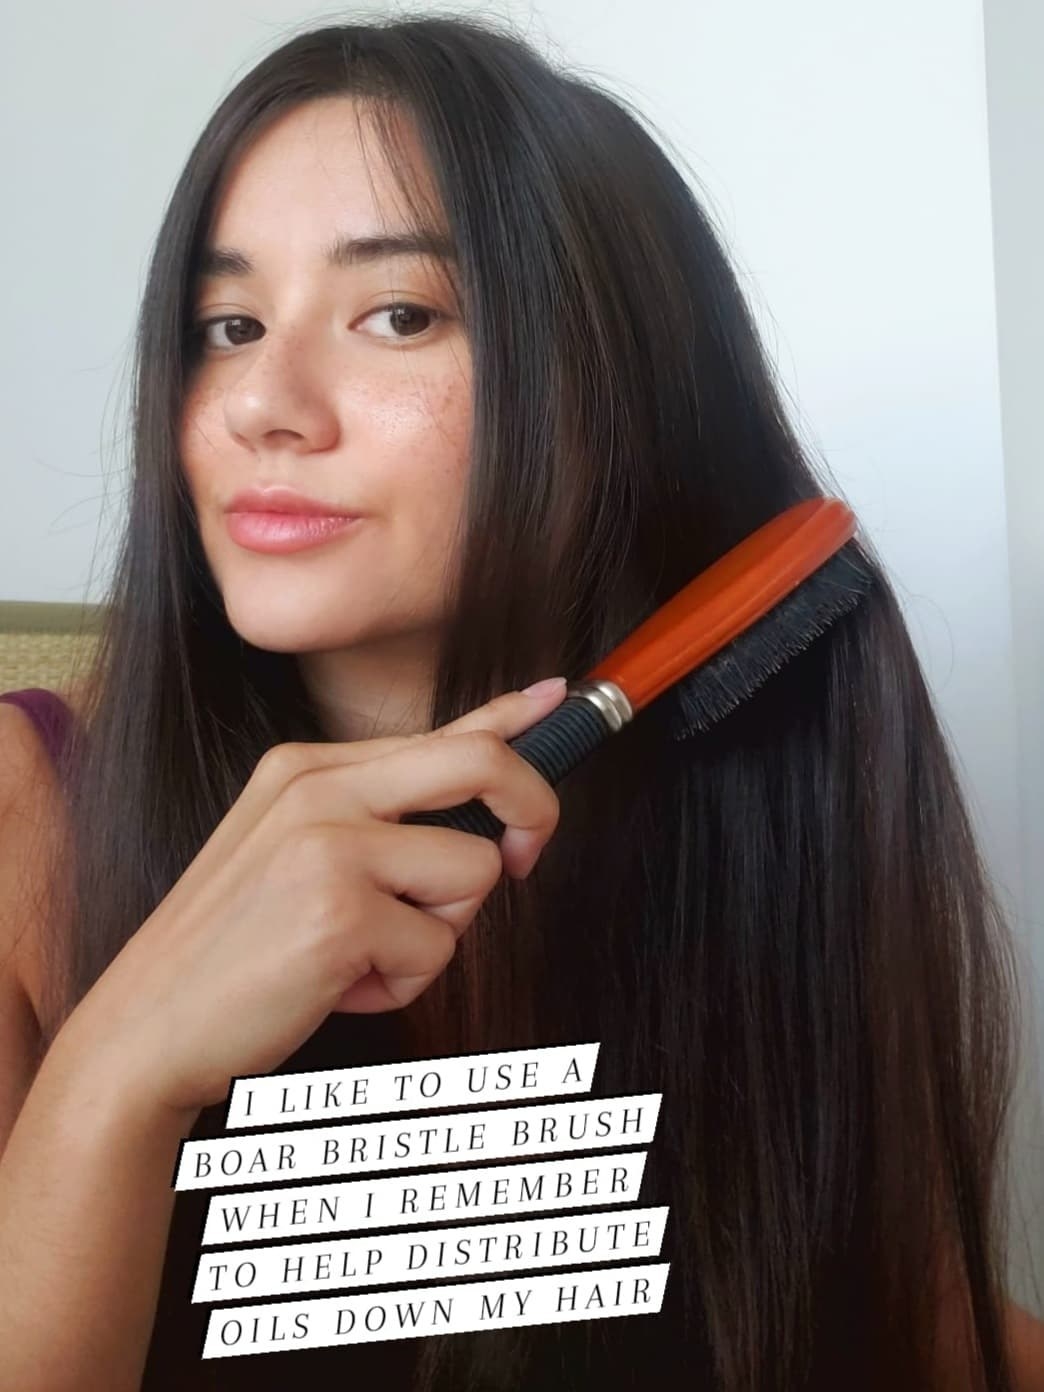 The writer uses a boar bristle brush to brush her hair, with the caption, &quot;I like to use a boar bristle brush when I remember to help distribute oils down my hair&quot;